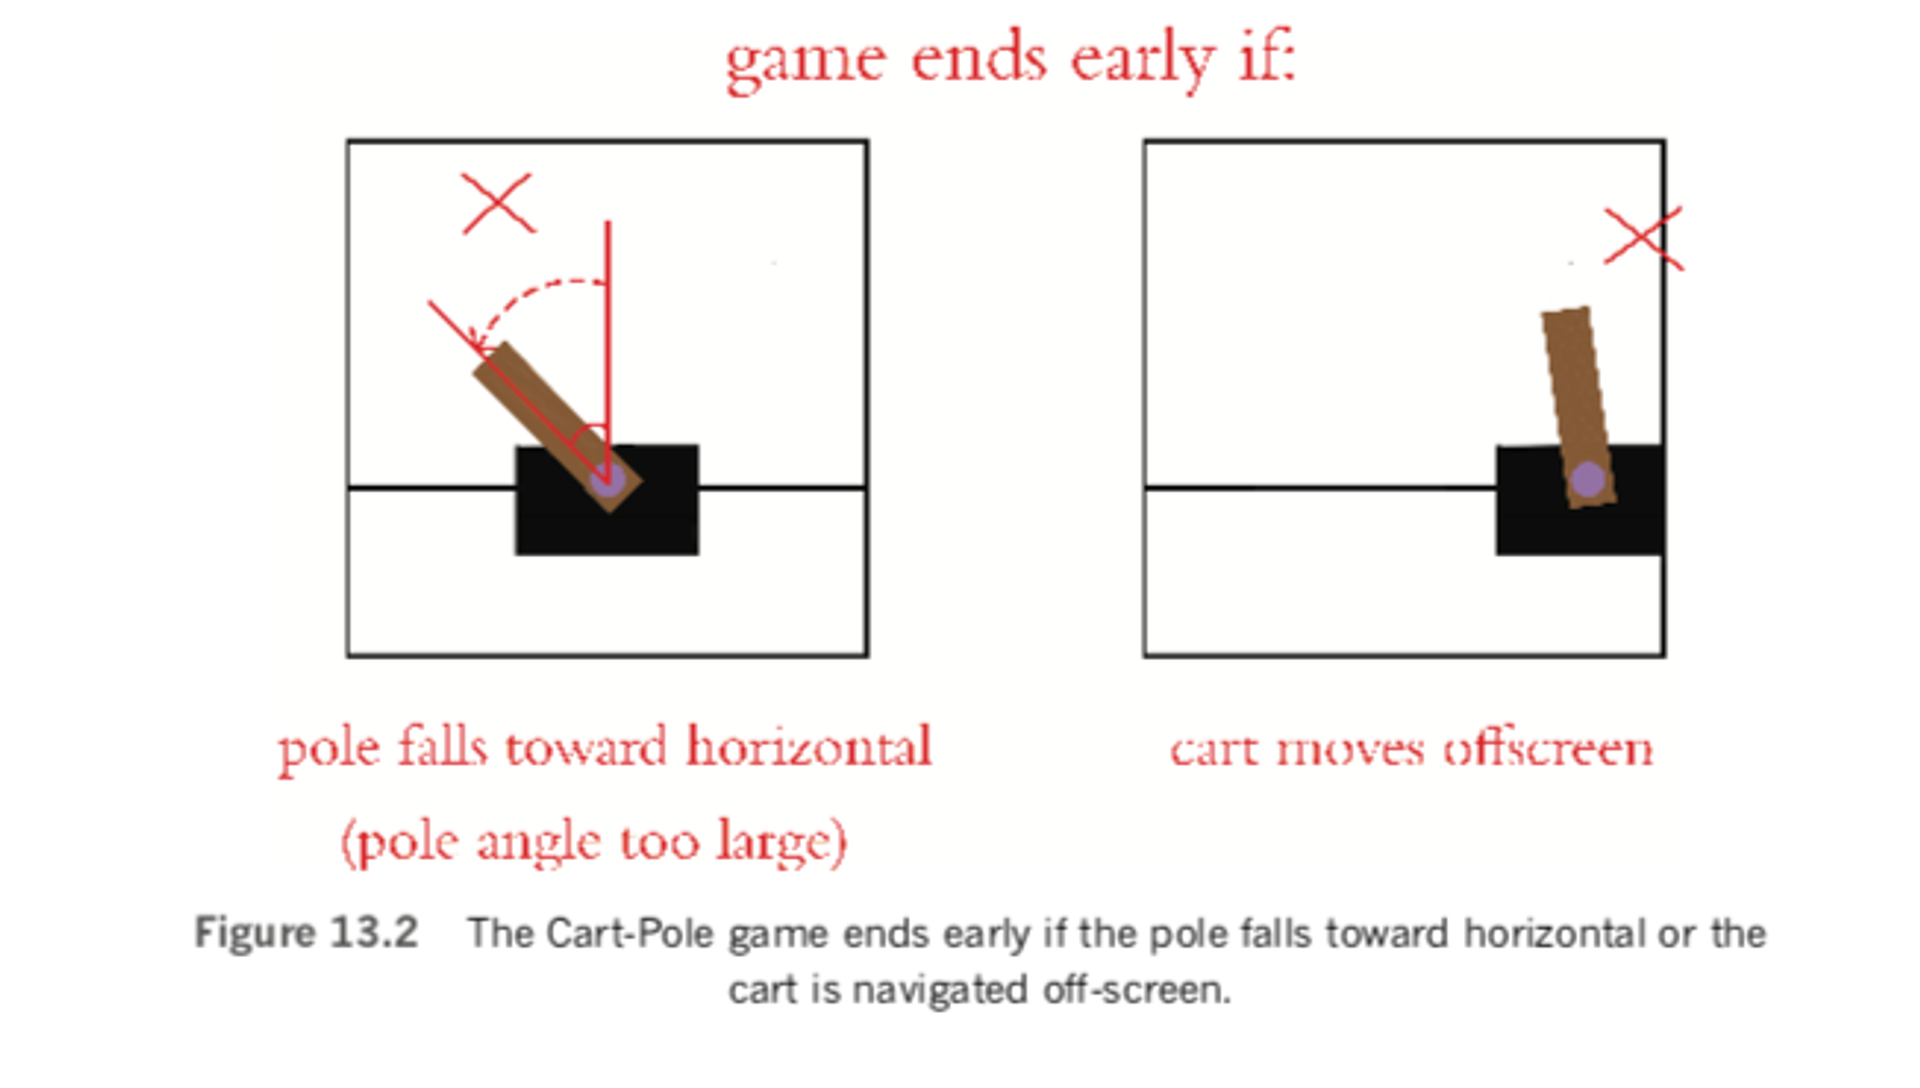 The Cart-Pole game ends early if the pole falls towards horizontal or the cart is navigated off screen